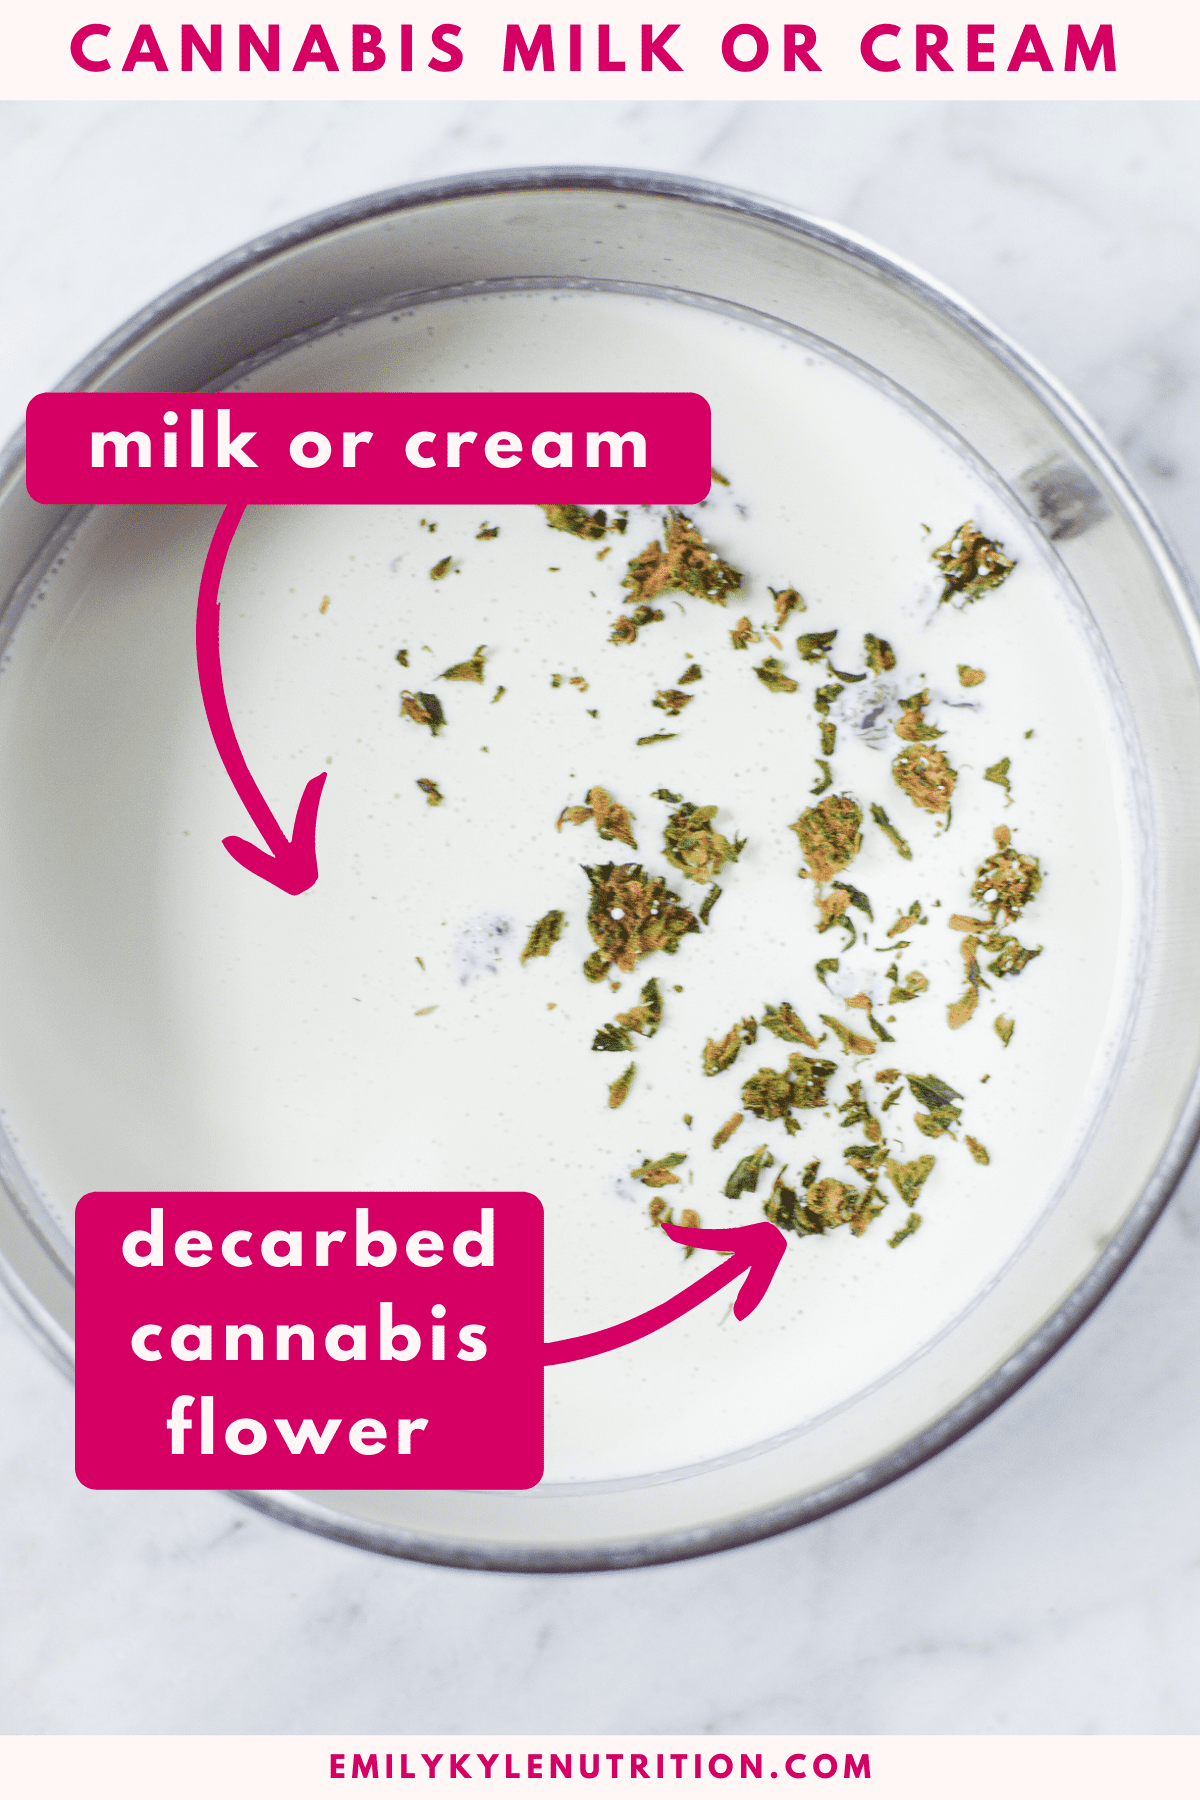 A white countertop with a metal pan filled with milk and cannabis, labeled